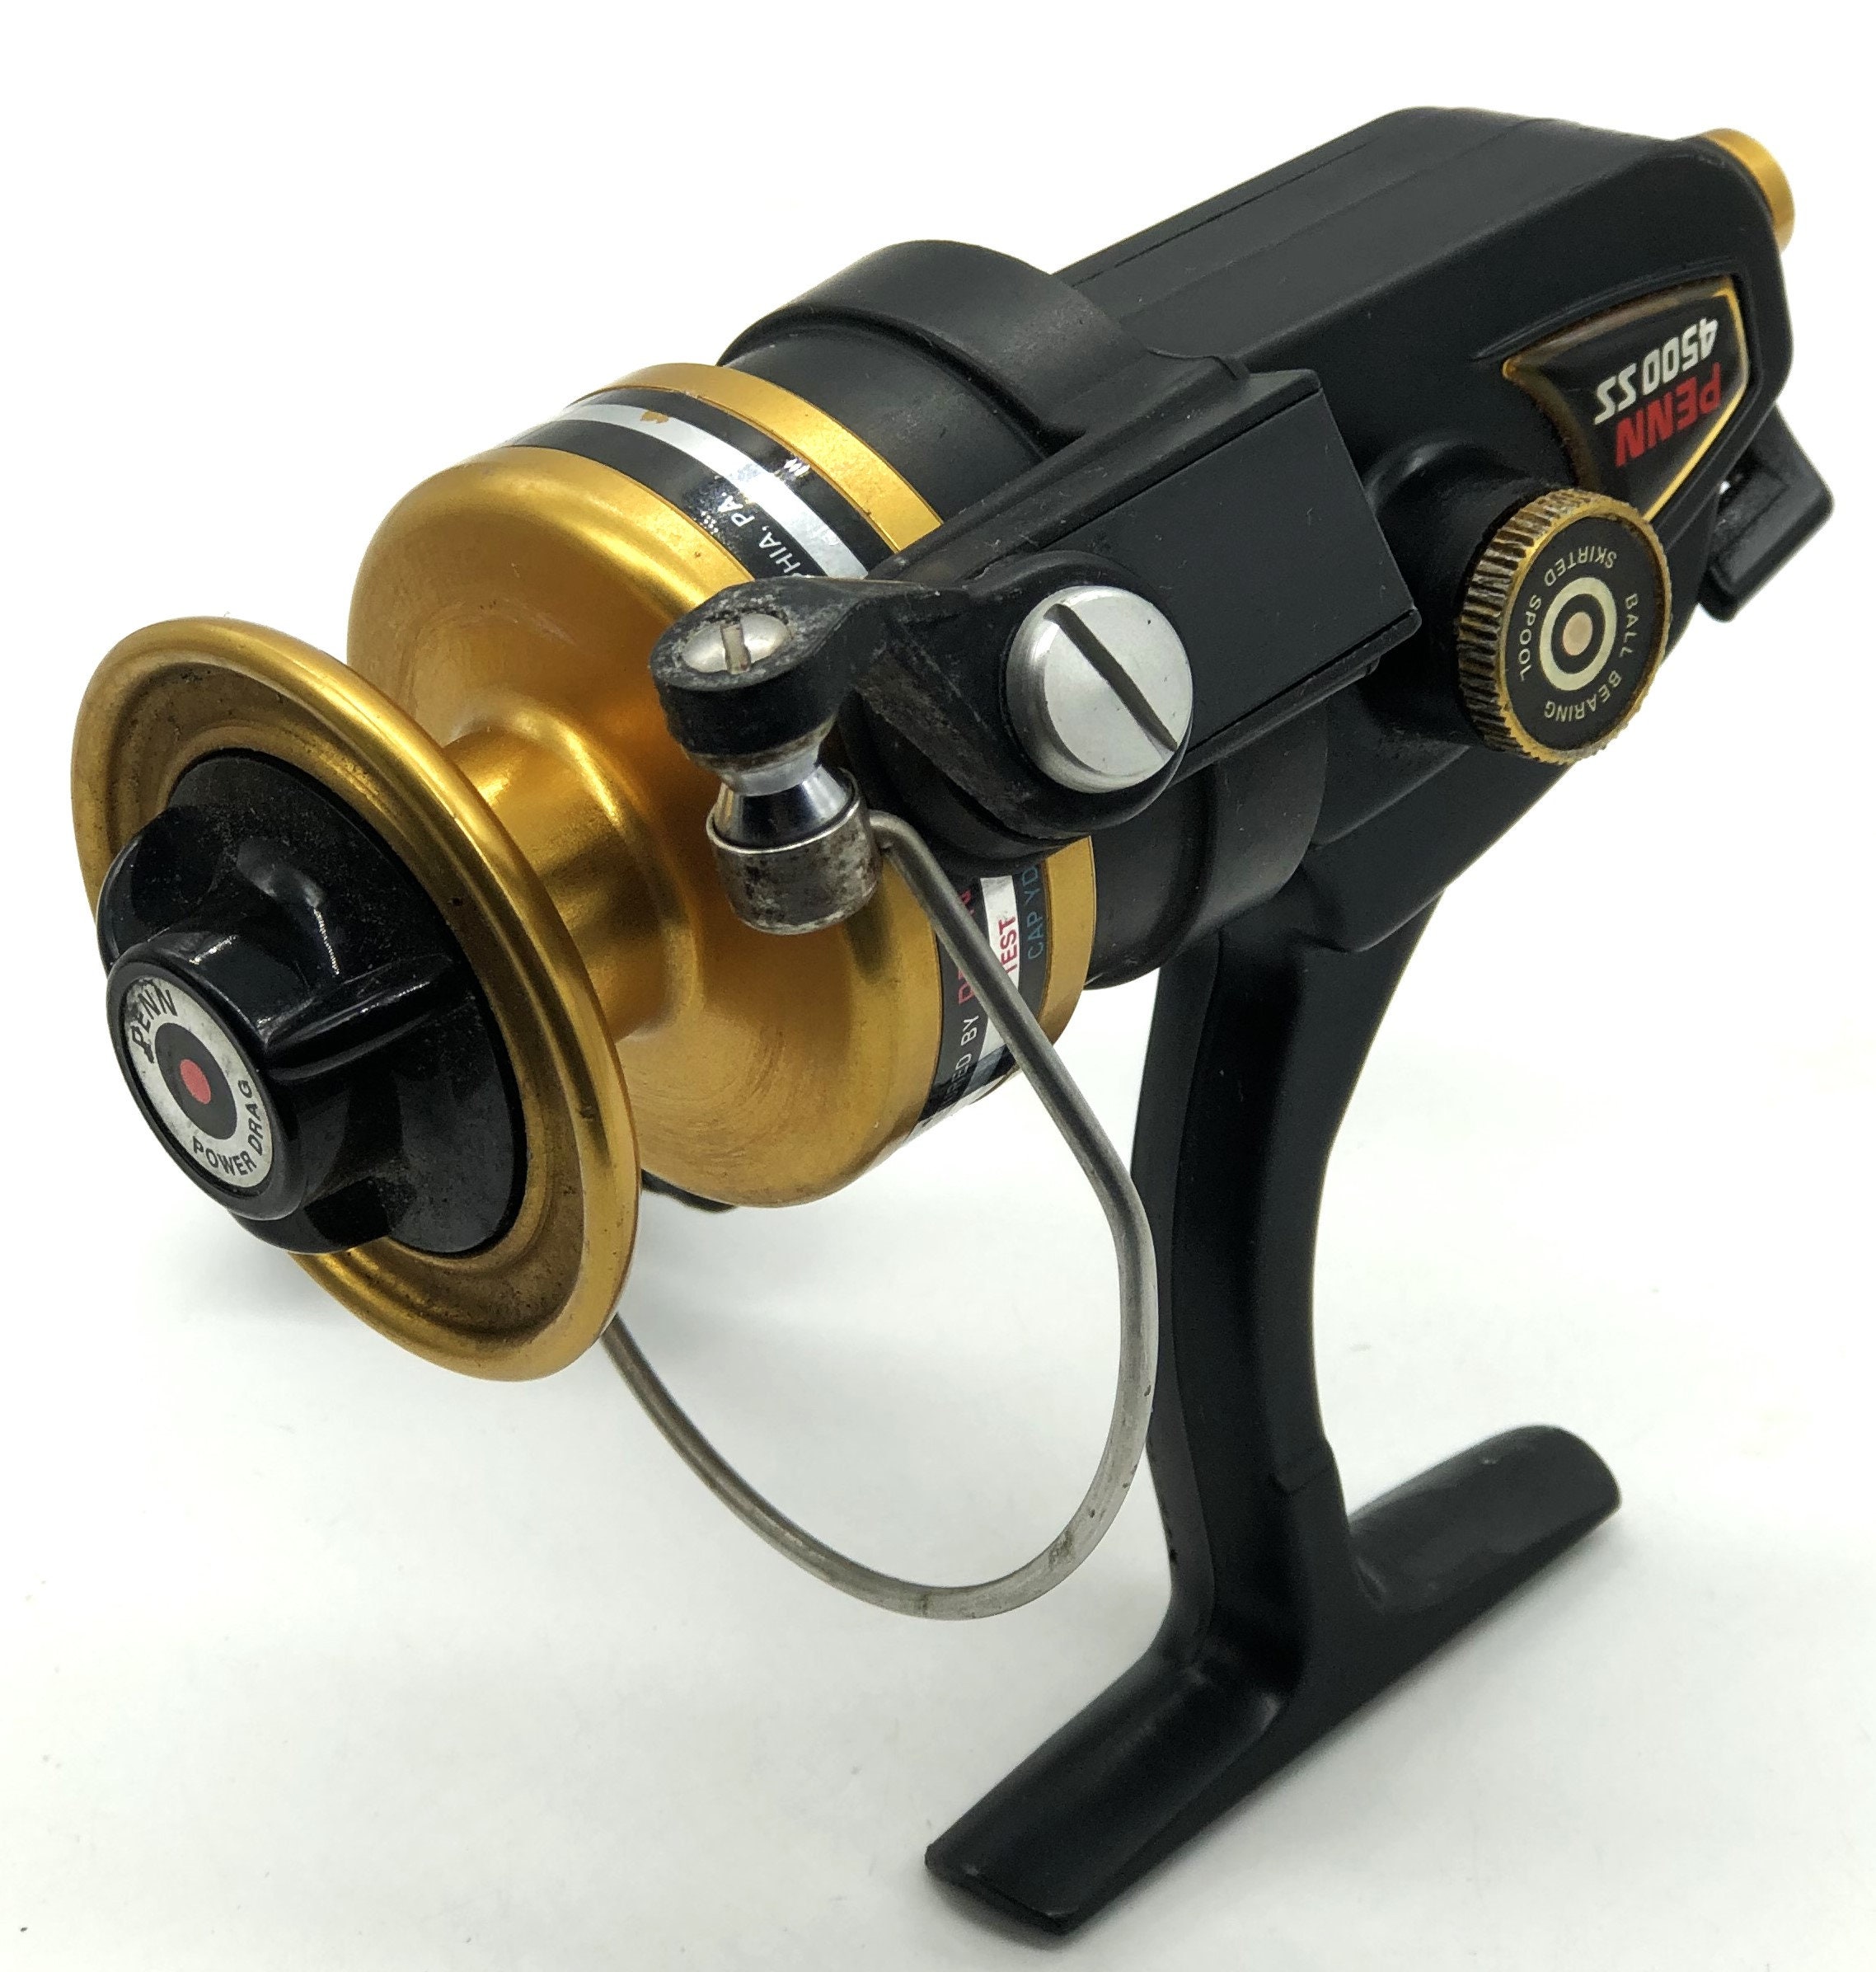 Penn 4500SS Spinning Reel, Freshly Serviced, in Very Good+ Condition!